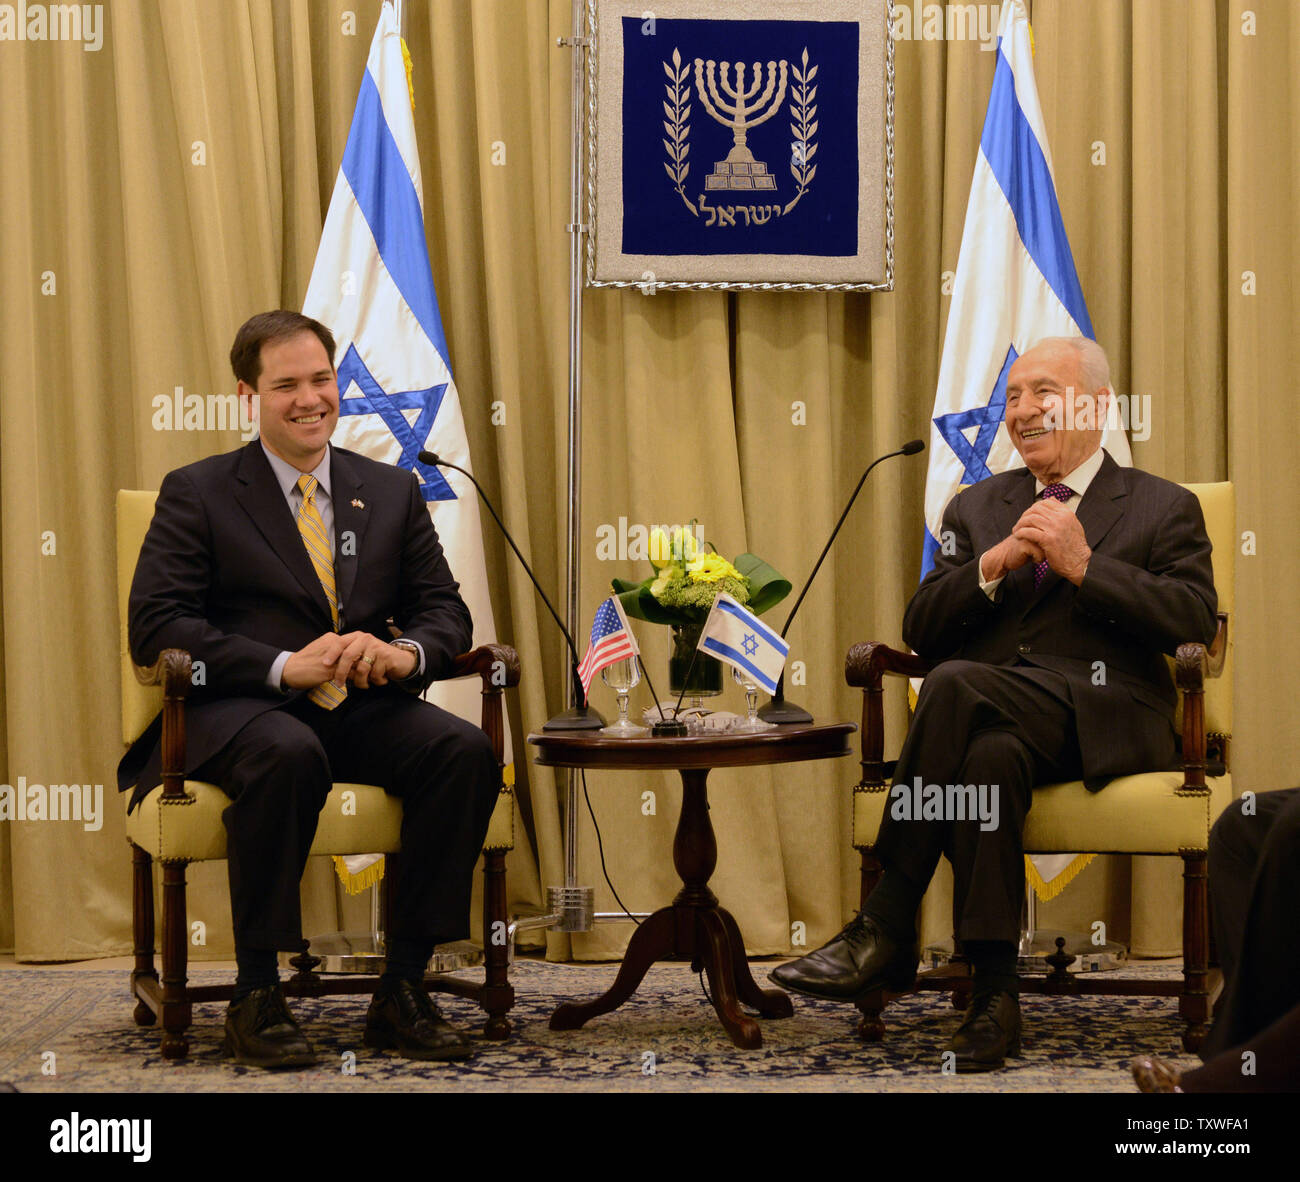 Sen. Marco Rubio (R-FL) (L) laughs with Israeli President Shimon Peres (R) before a diplomatic work meeting, February 20, 2013, at Peres' residence in Jerusalem, Israel.  UPI/Debbie Hill Stock Photo